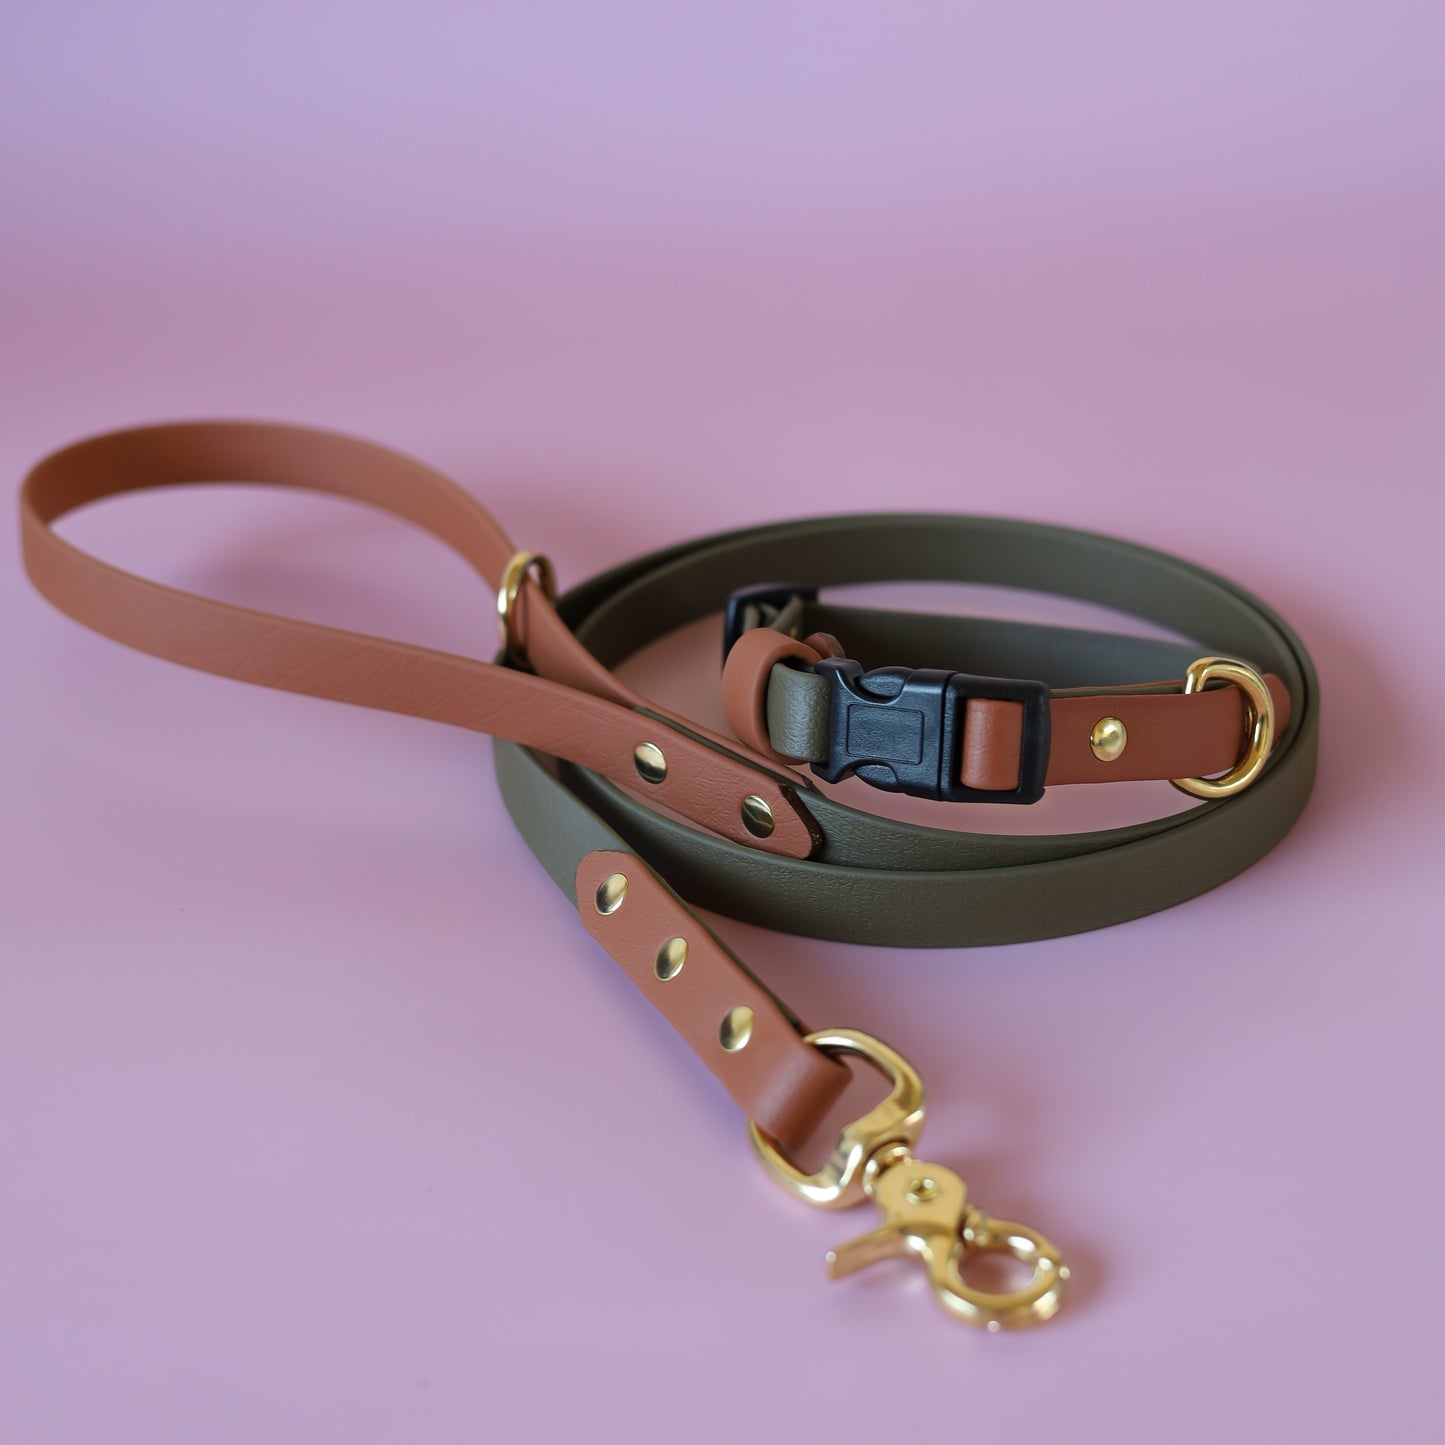 Adjustable collar with quick release buckle - two tones